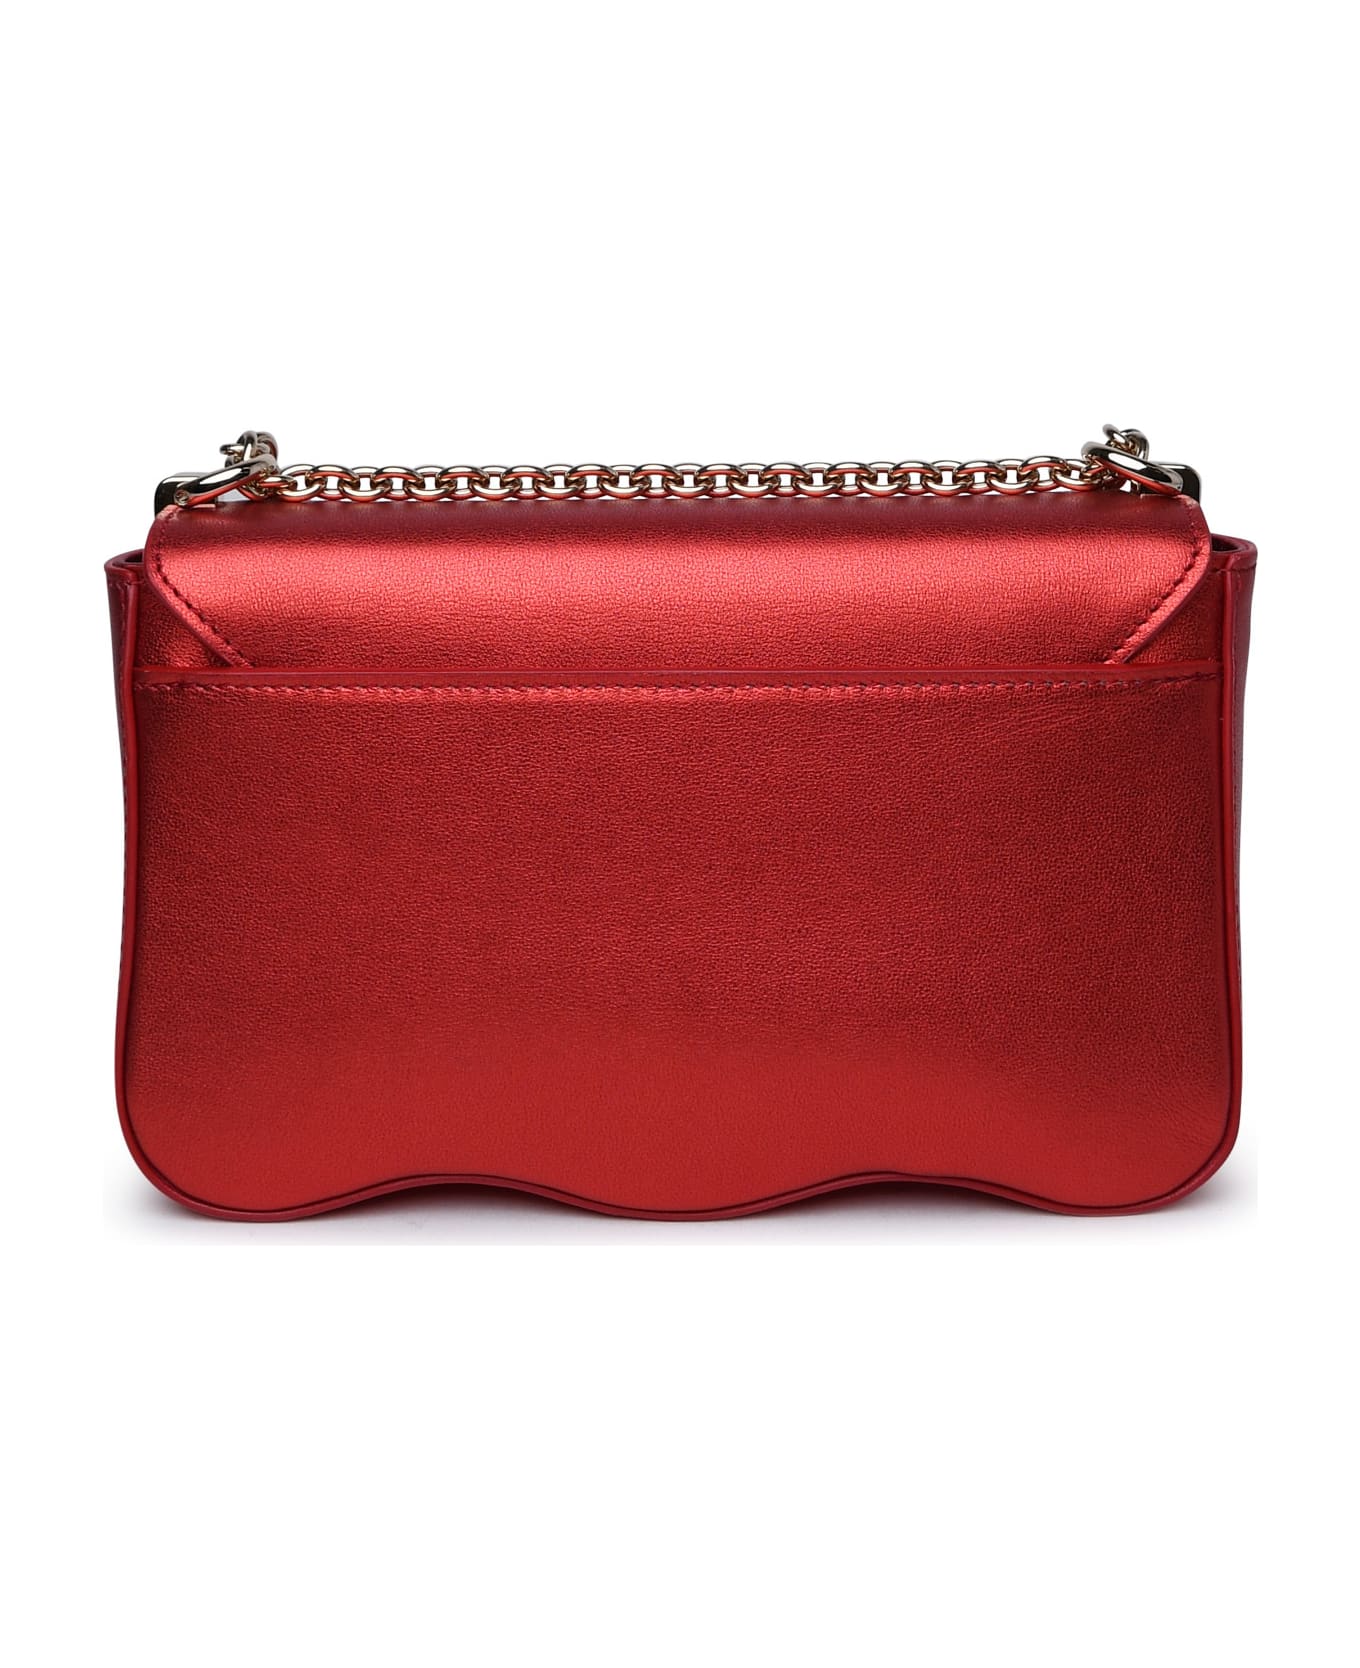 Furla Red Leather Bag - Red